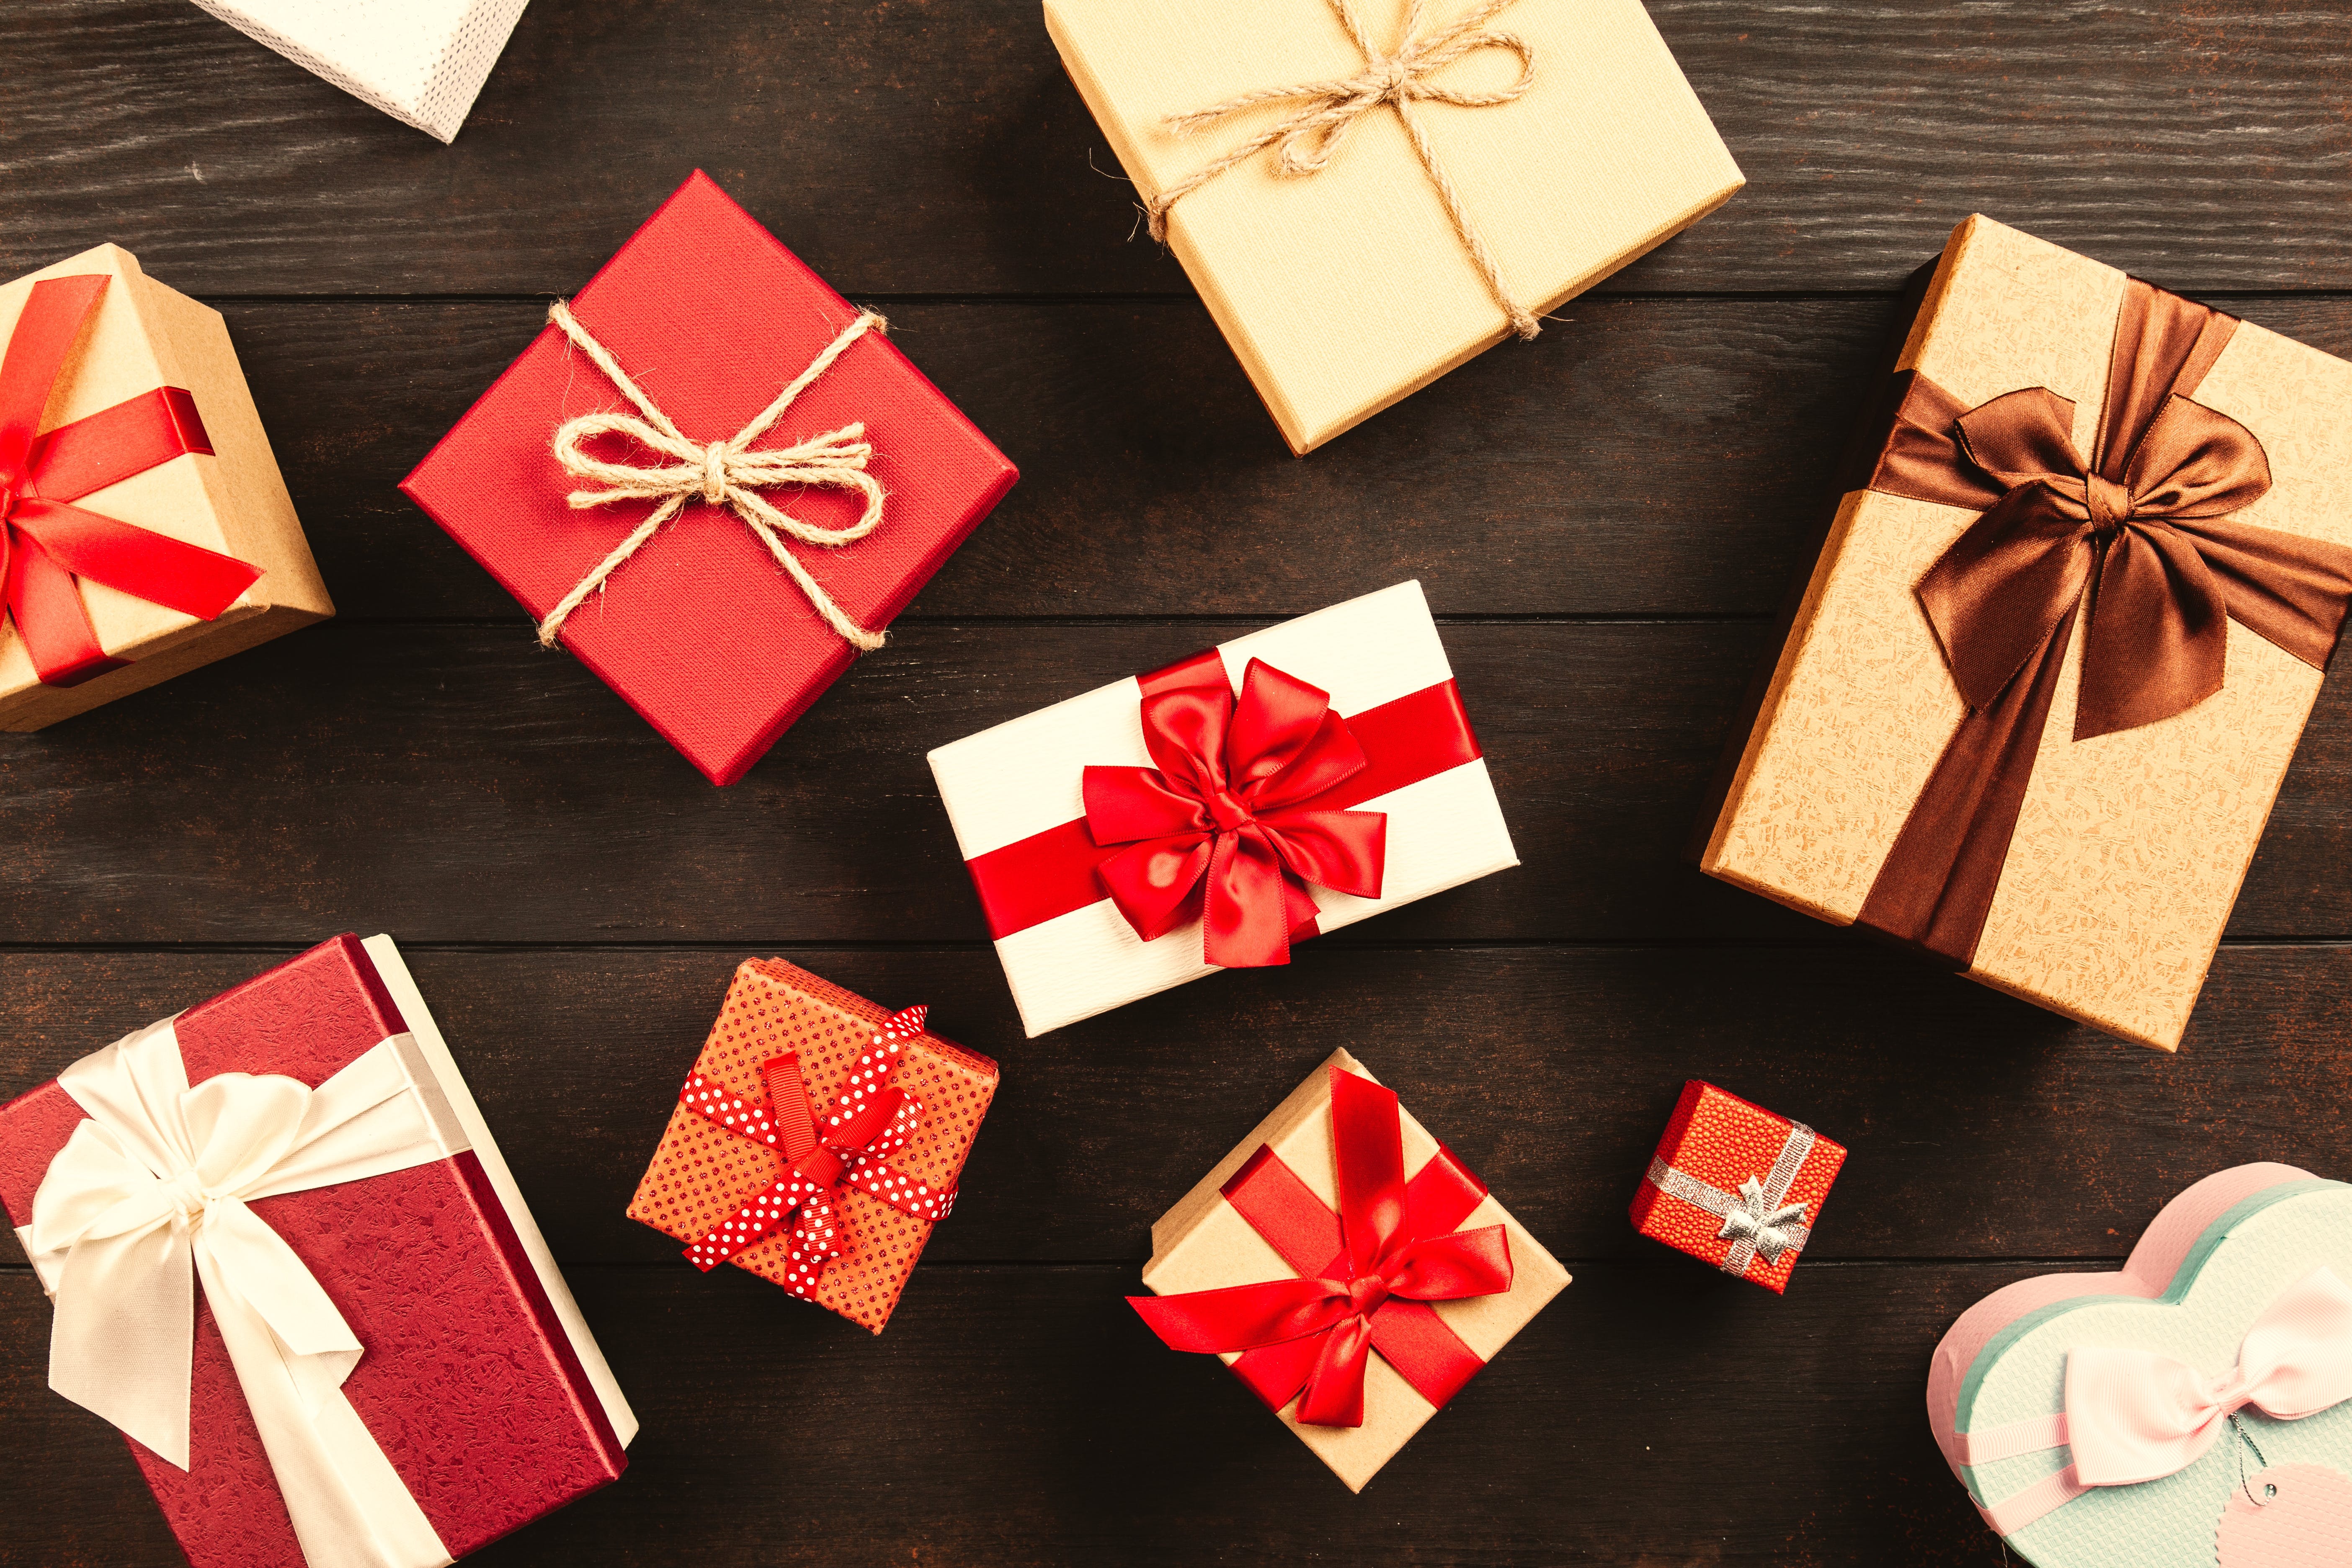 Gift boxes. | Source: Pexels